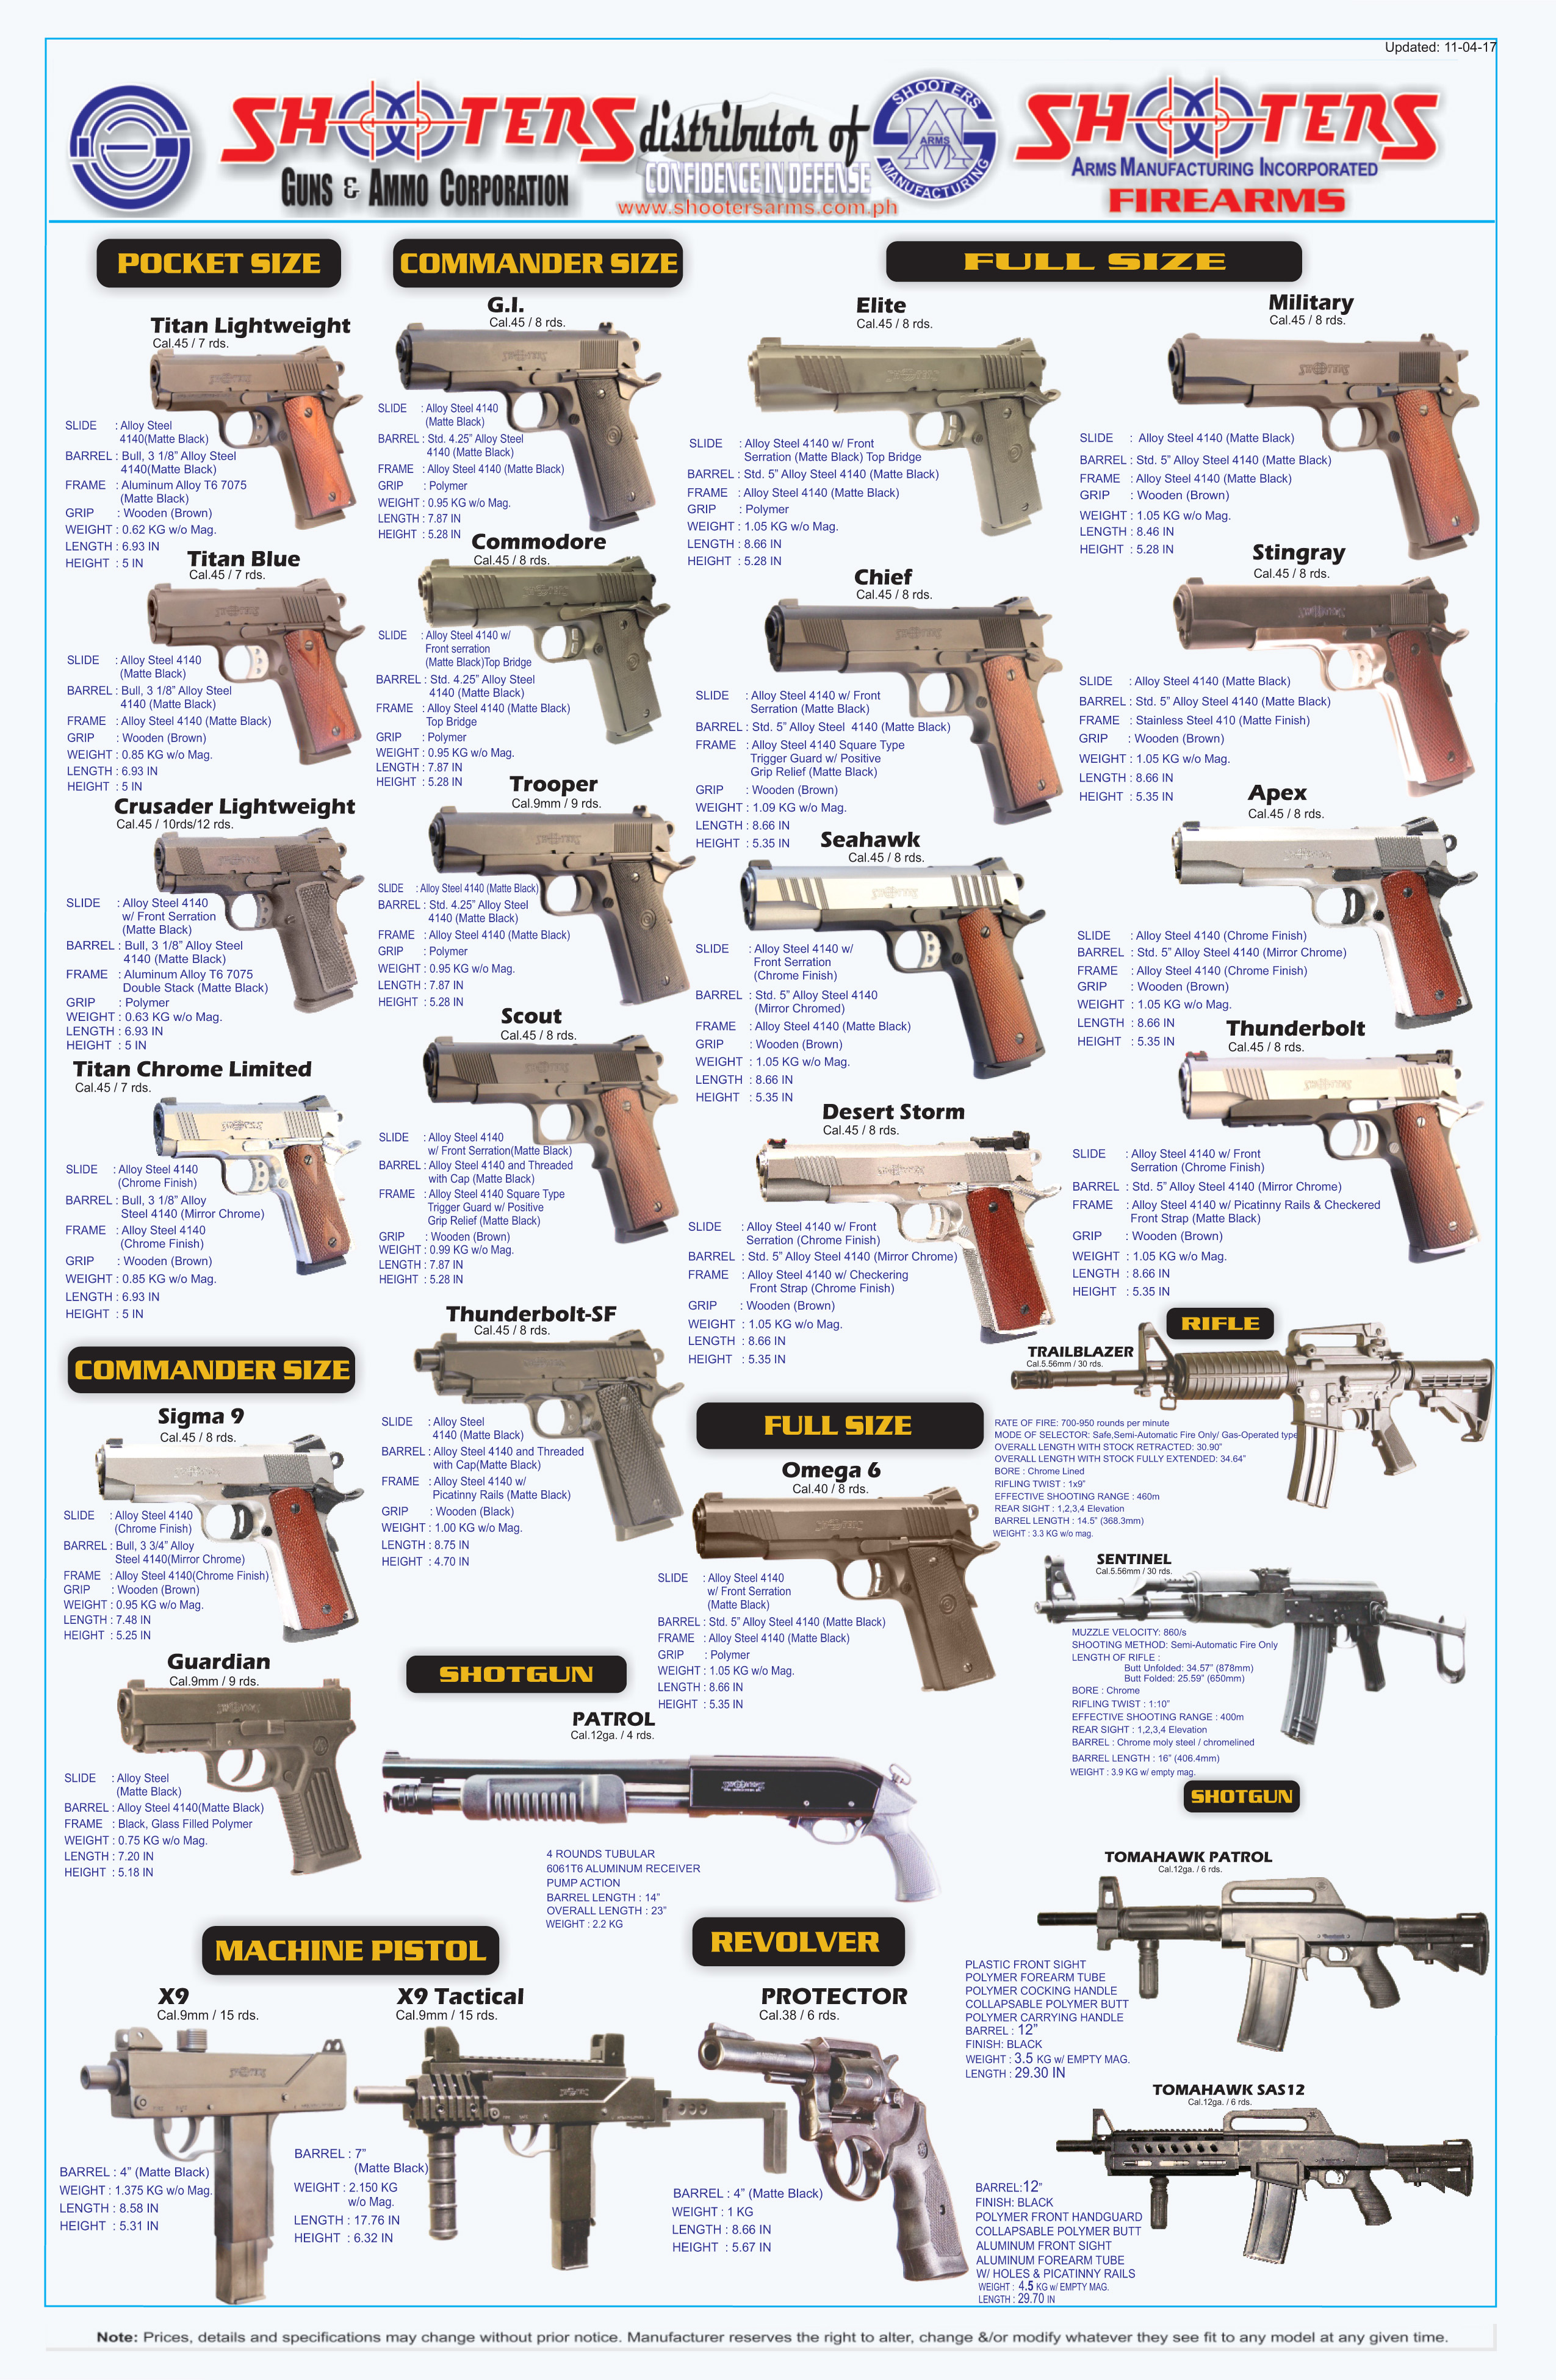 Shooters Arms Manufacturing Incorporated - Catalogs